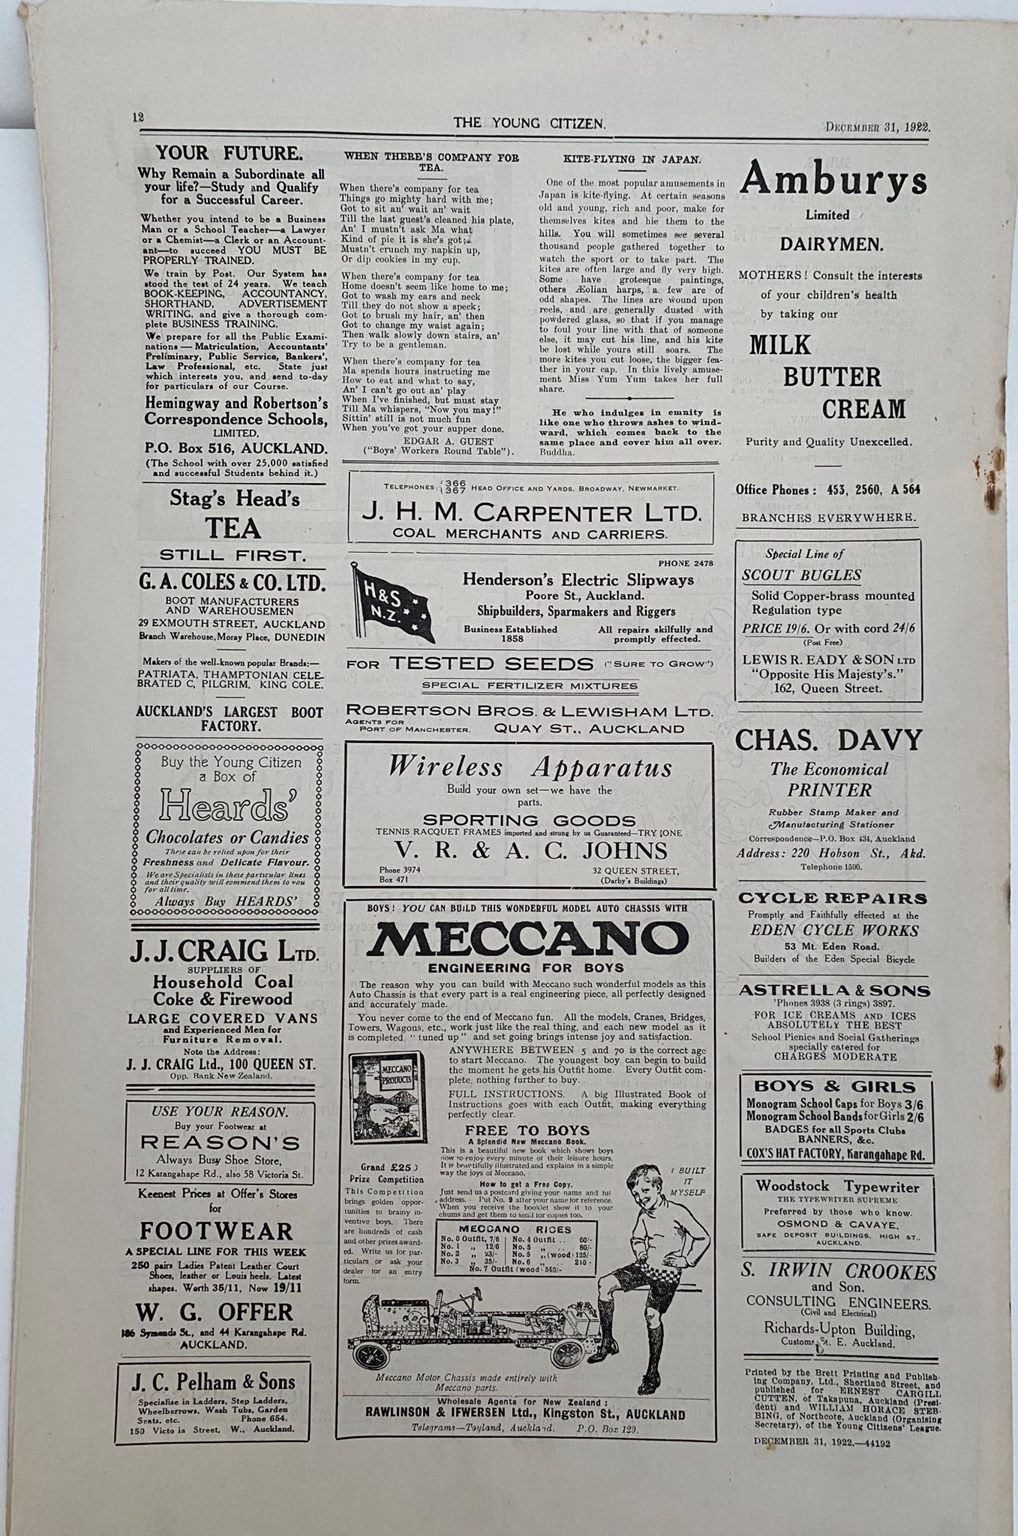 OLD NEWSPAPERS: The Young Citizen League from 1920s